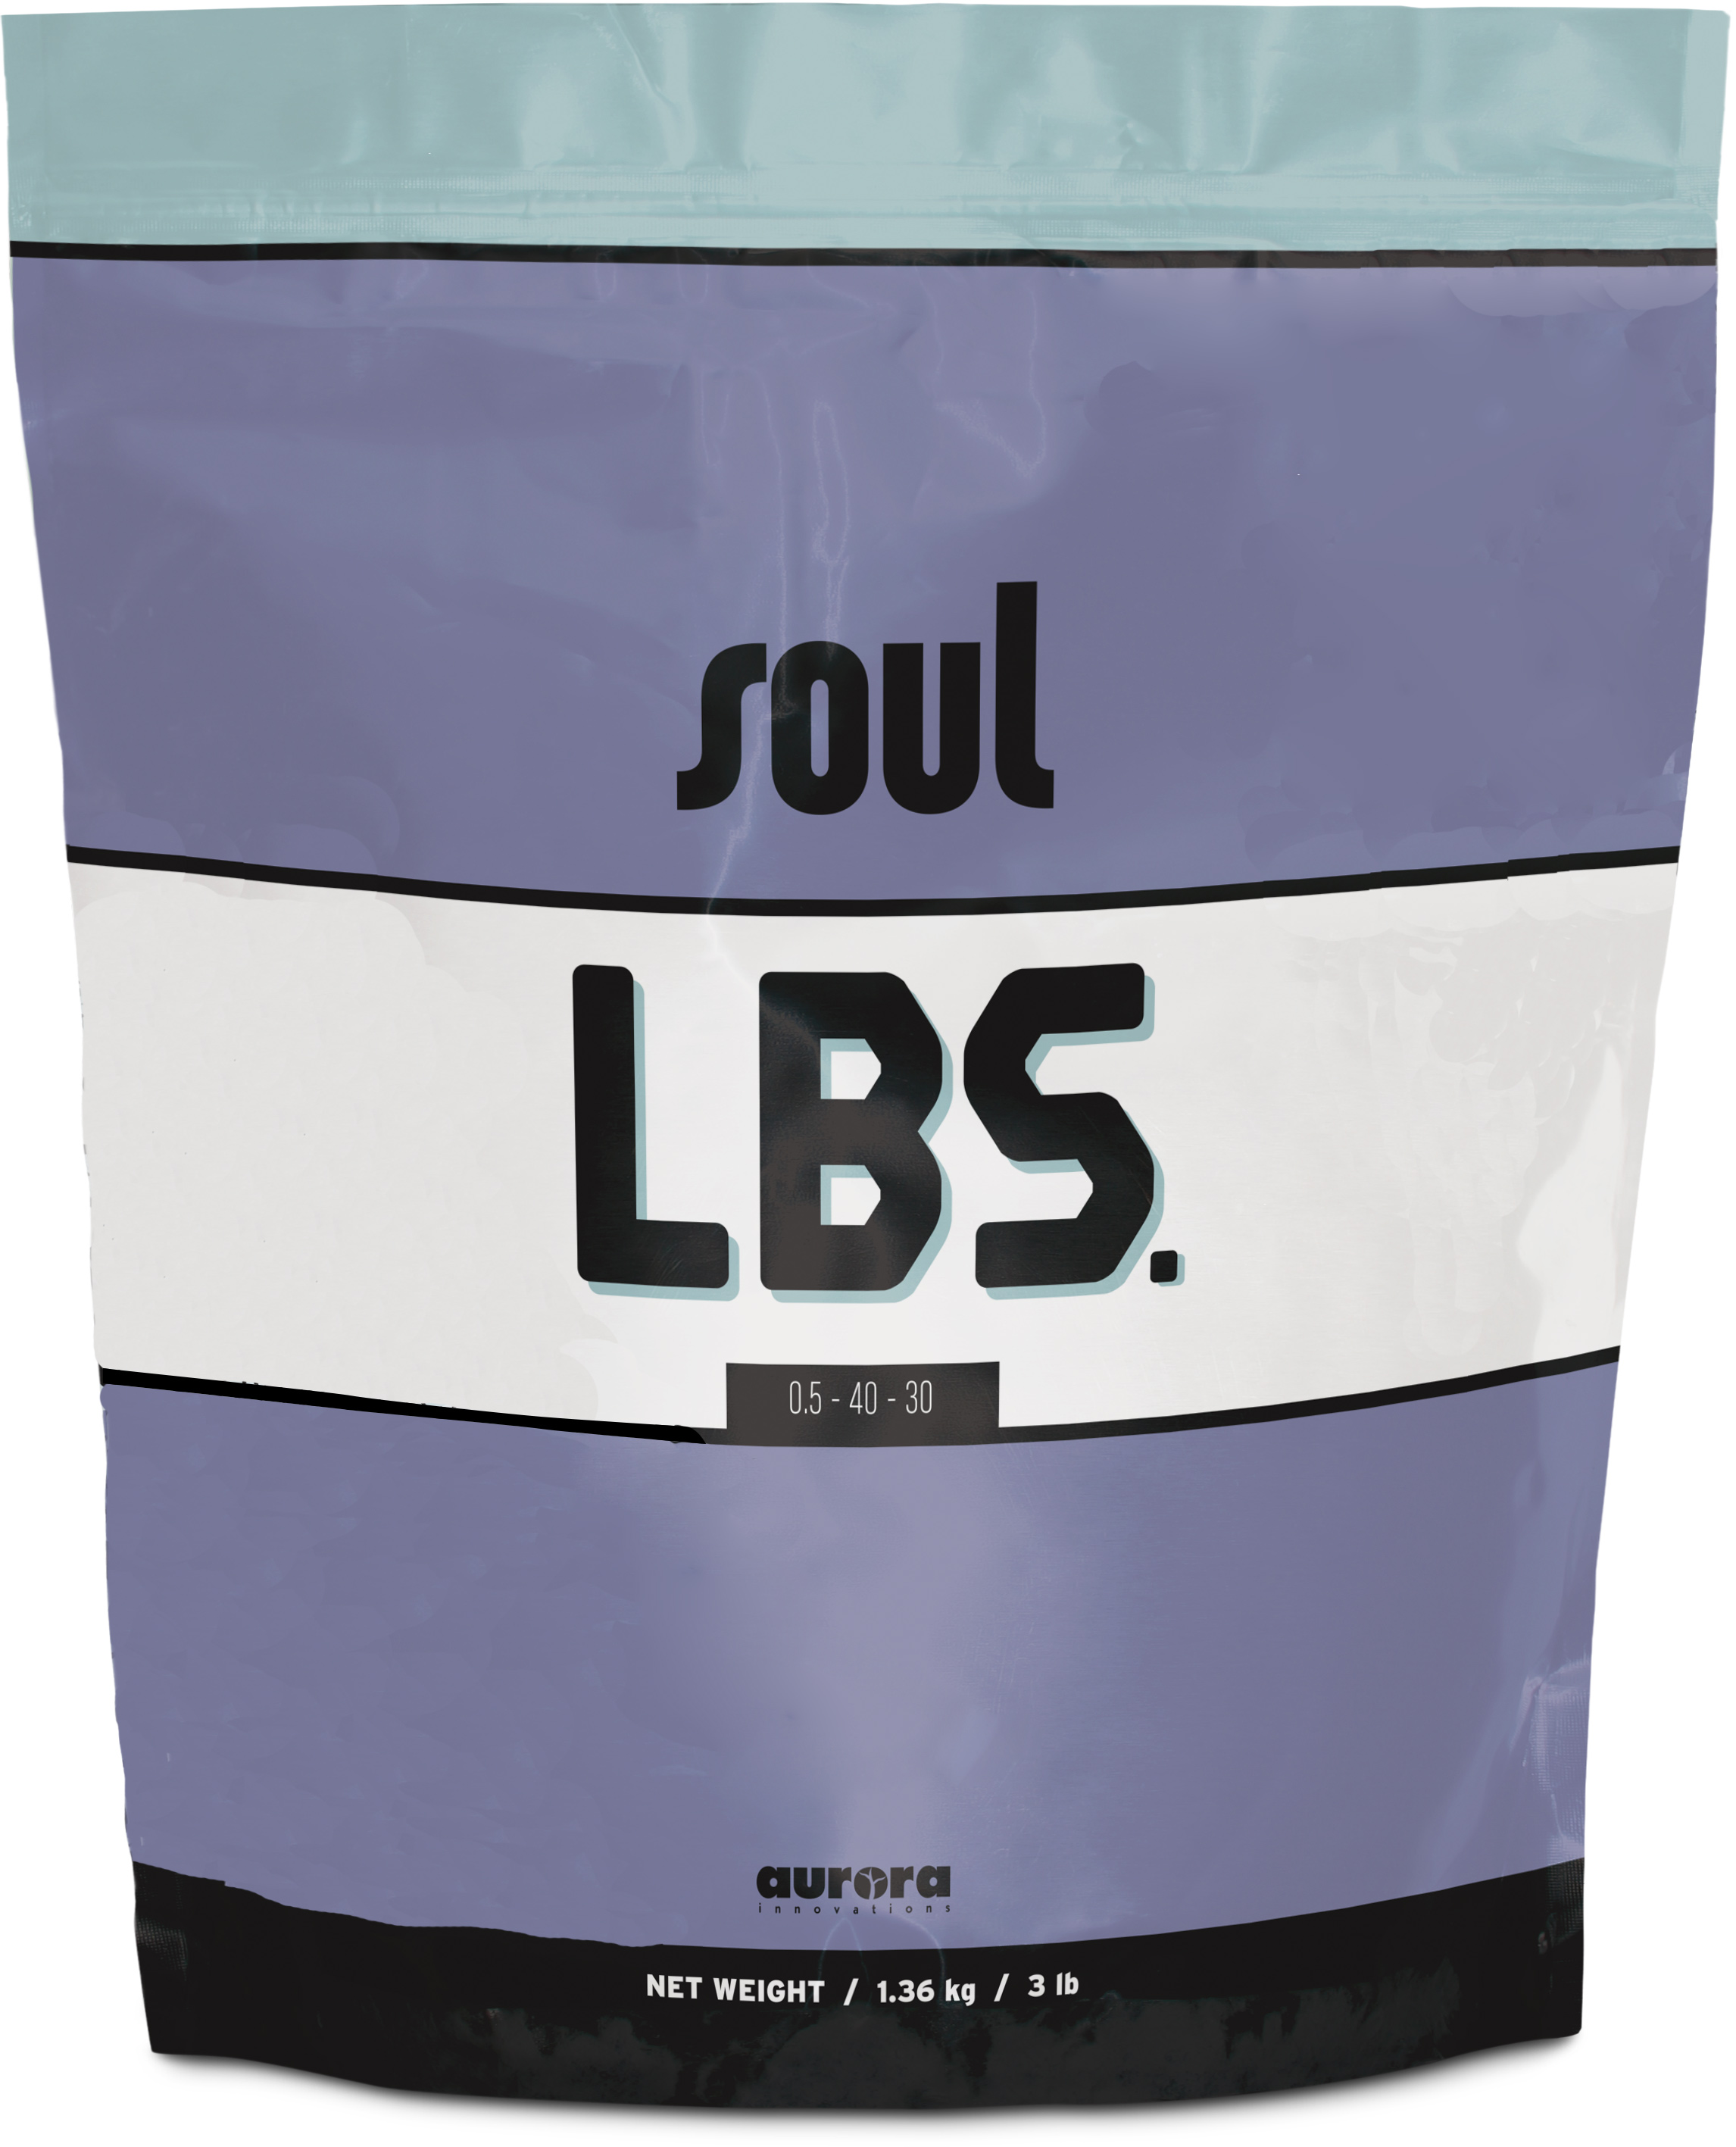 Picture for Soul LBS, 3 lb